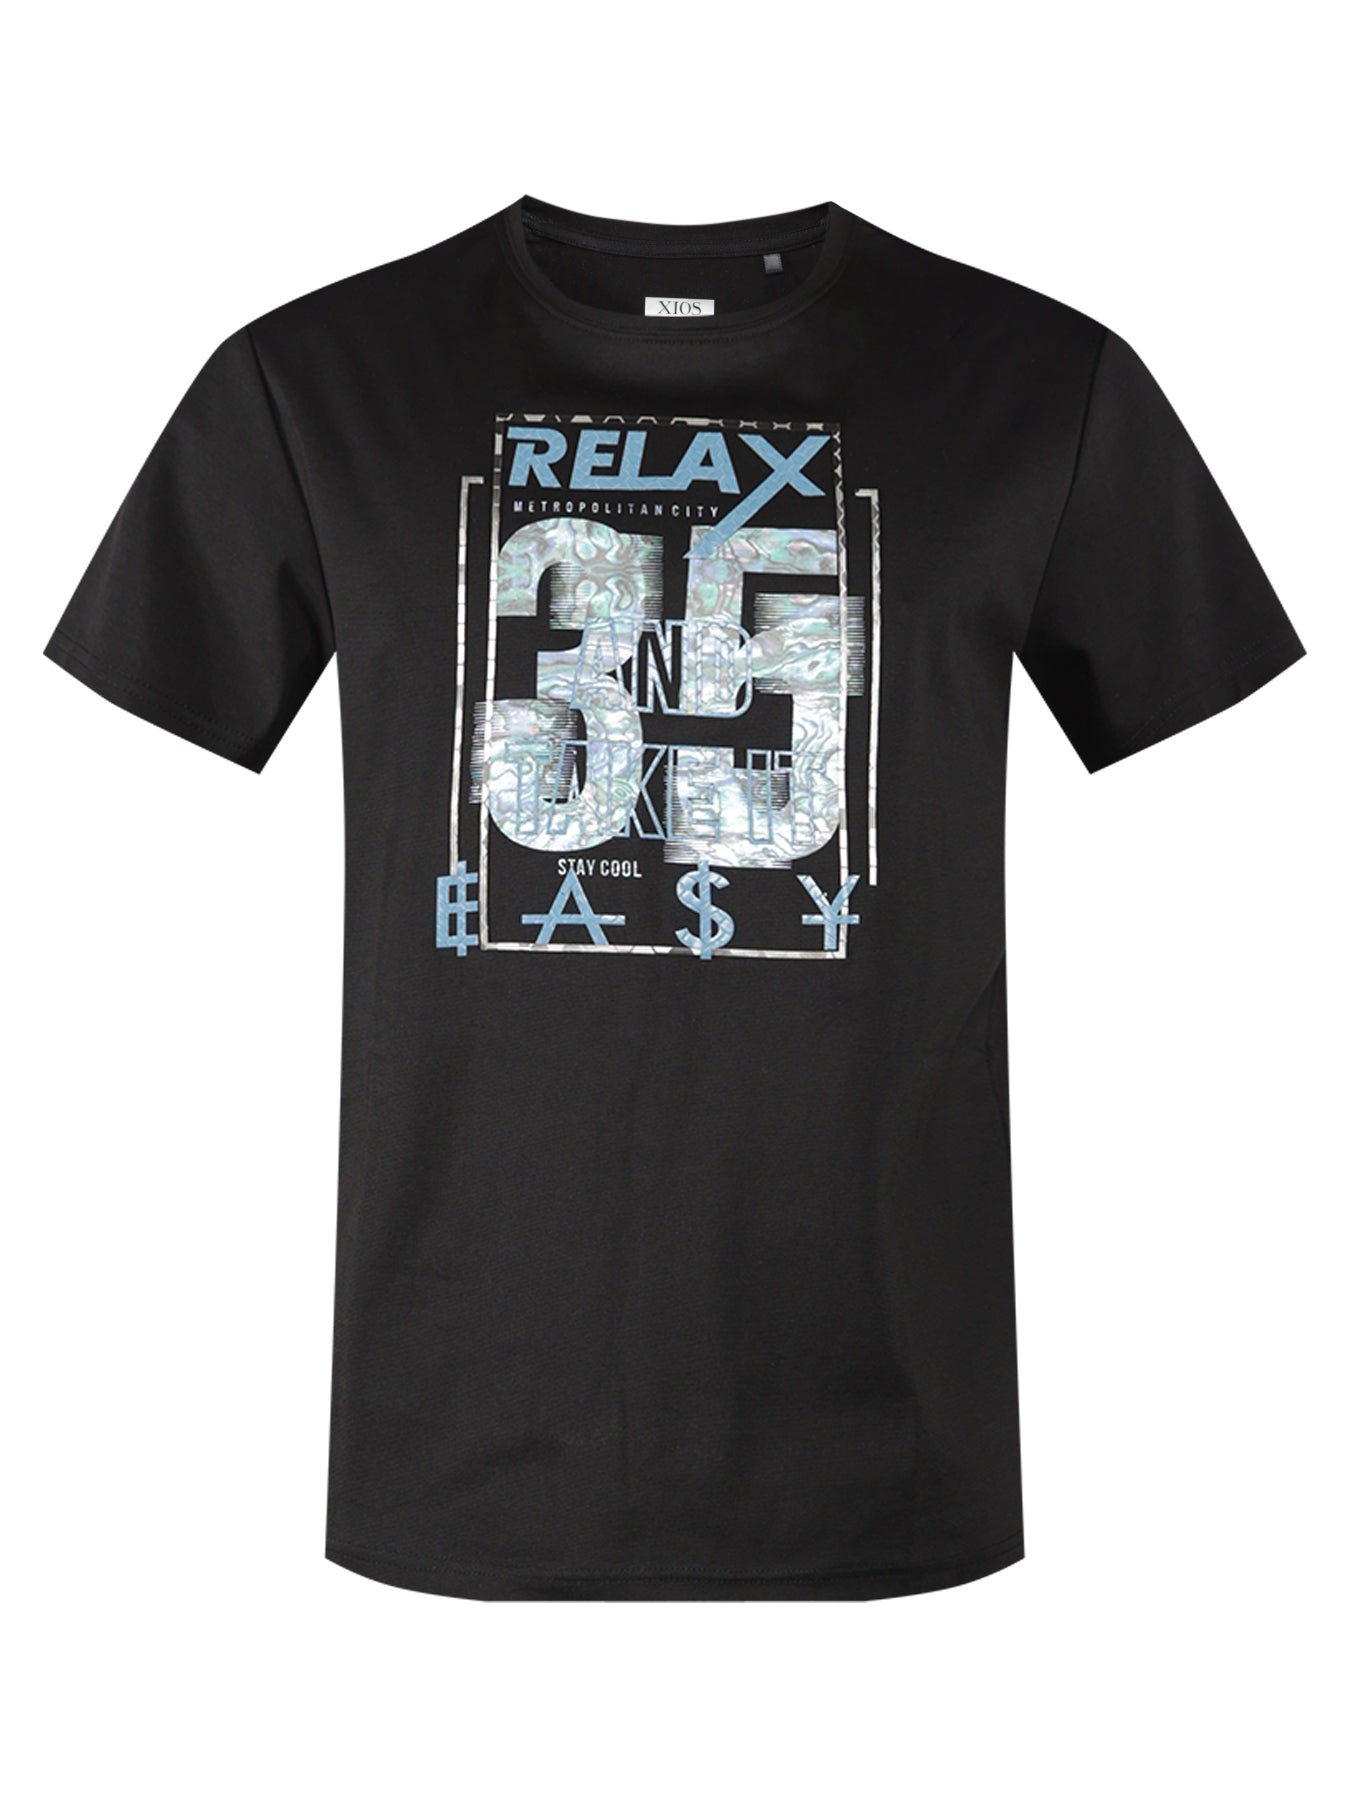 "Relax and Take It Easy" Graphic Tee